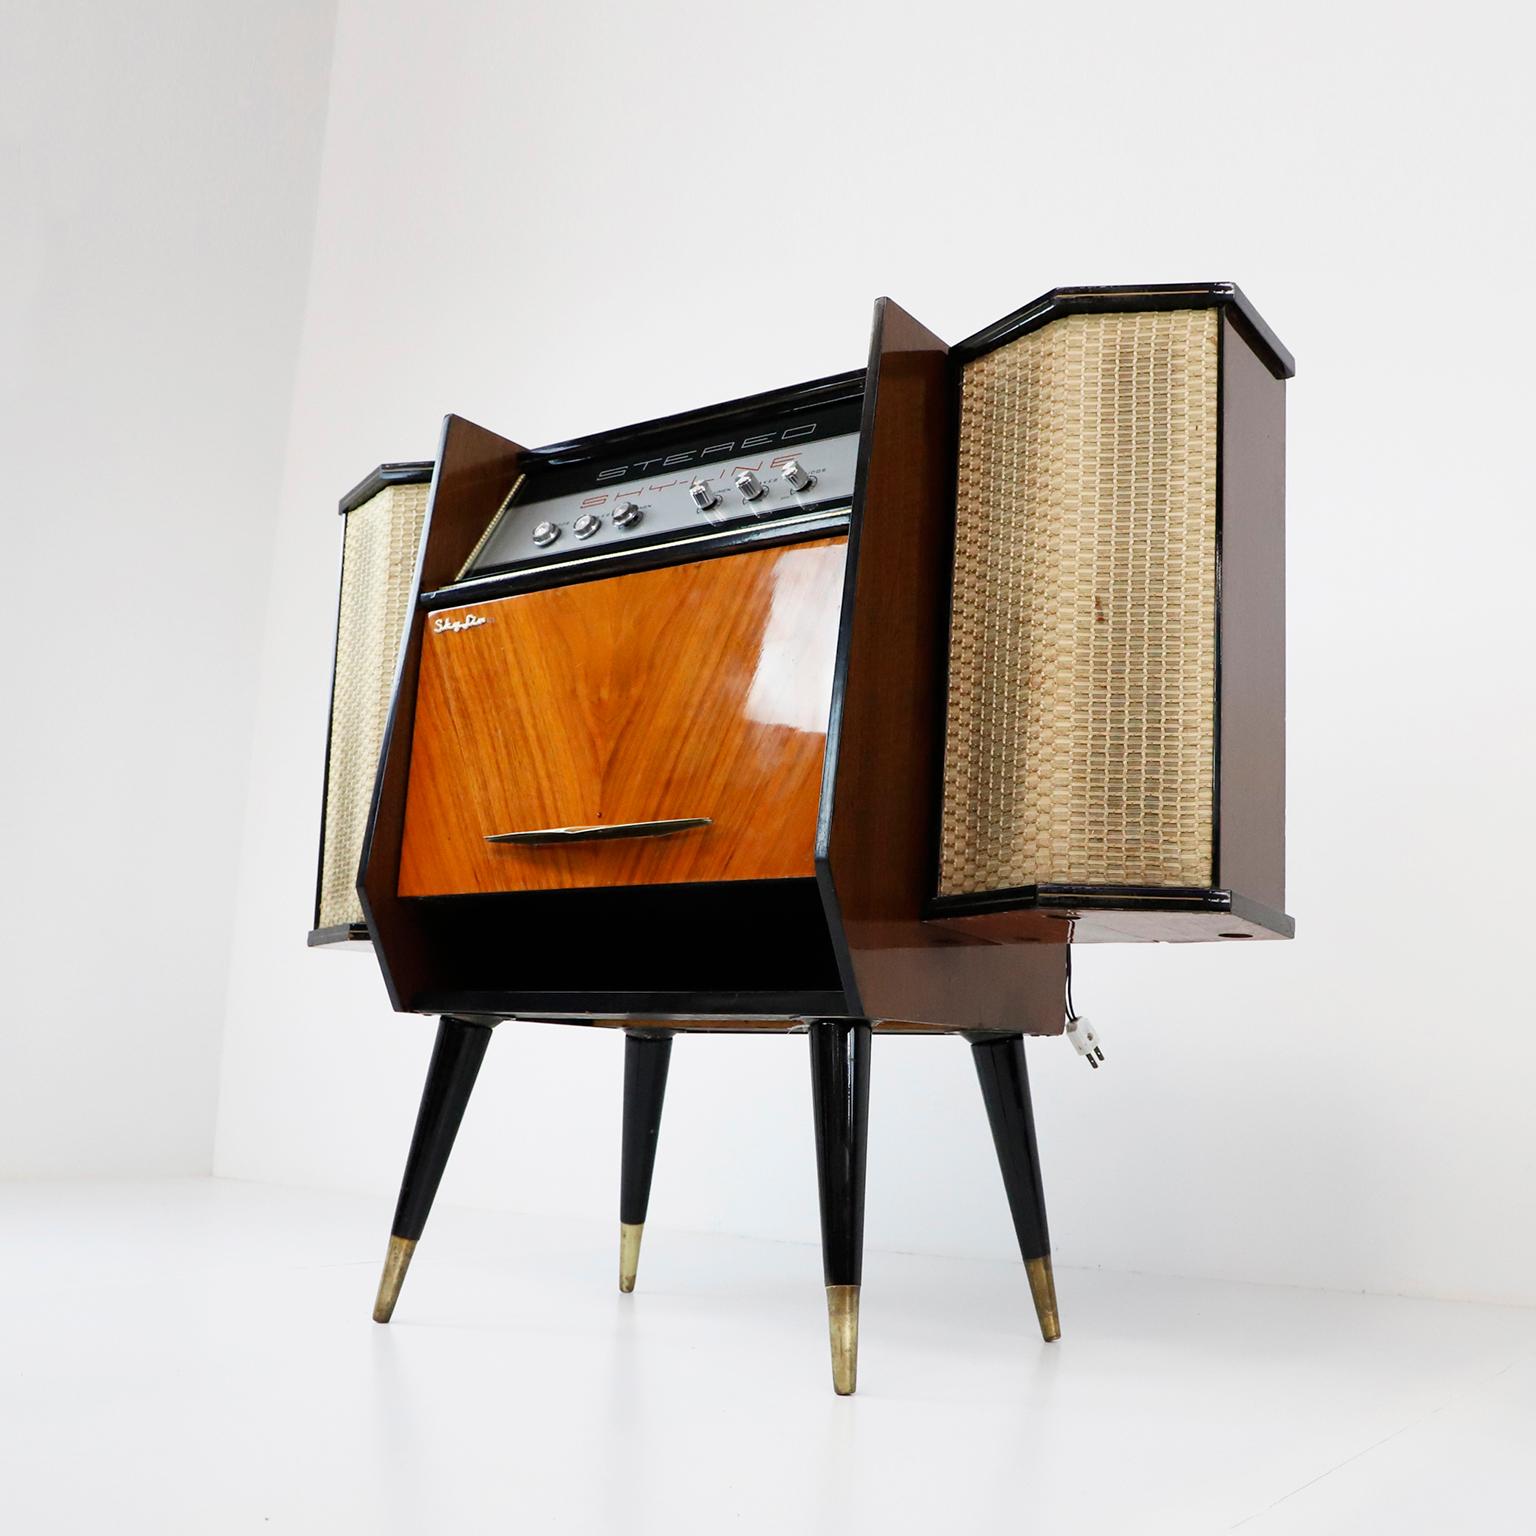 We offer this midcentury record player console in amazing vintage condition, the sound system works, circa 1950.